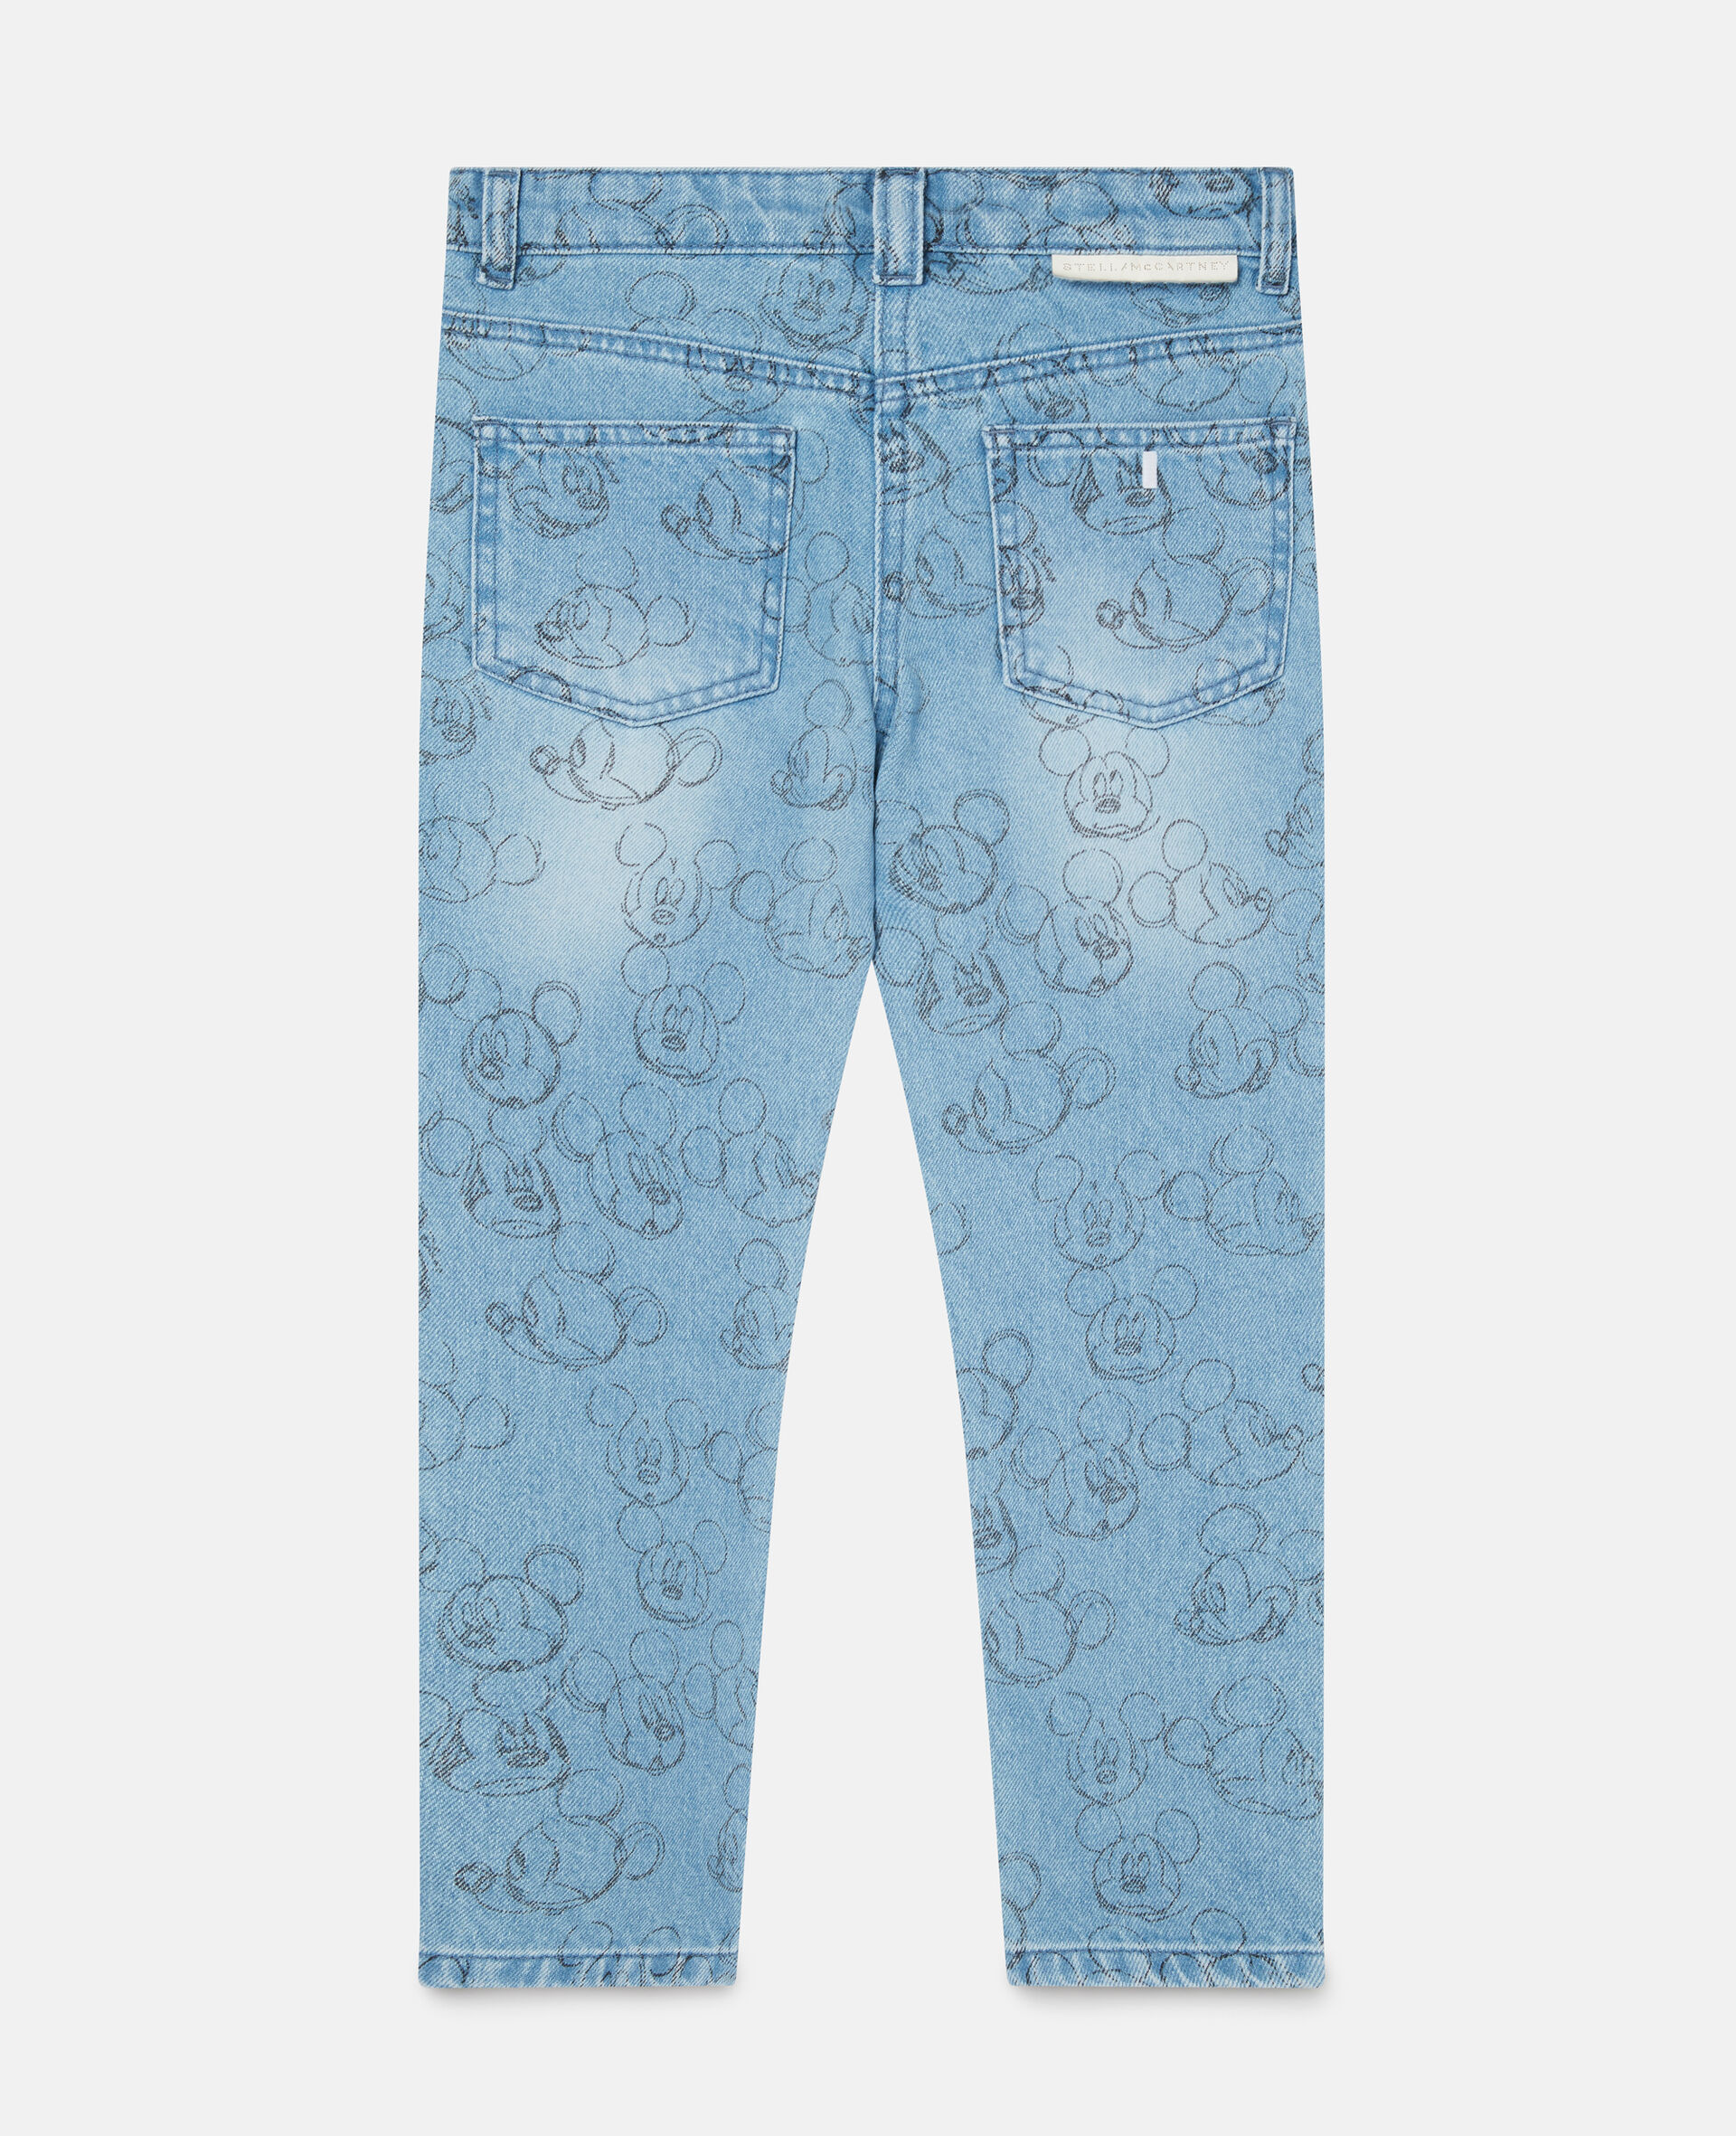 Fantasia Mickey Face Print Denim Trousers-Blue-large image number 3